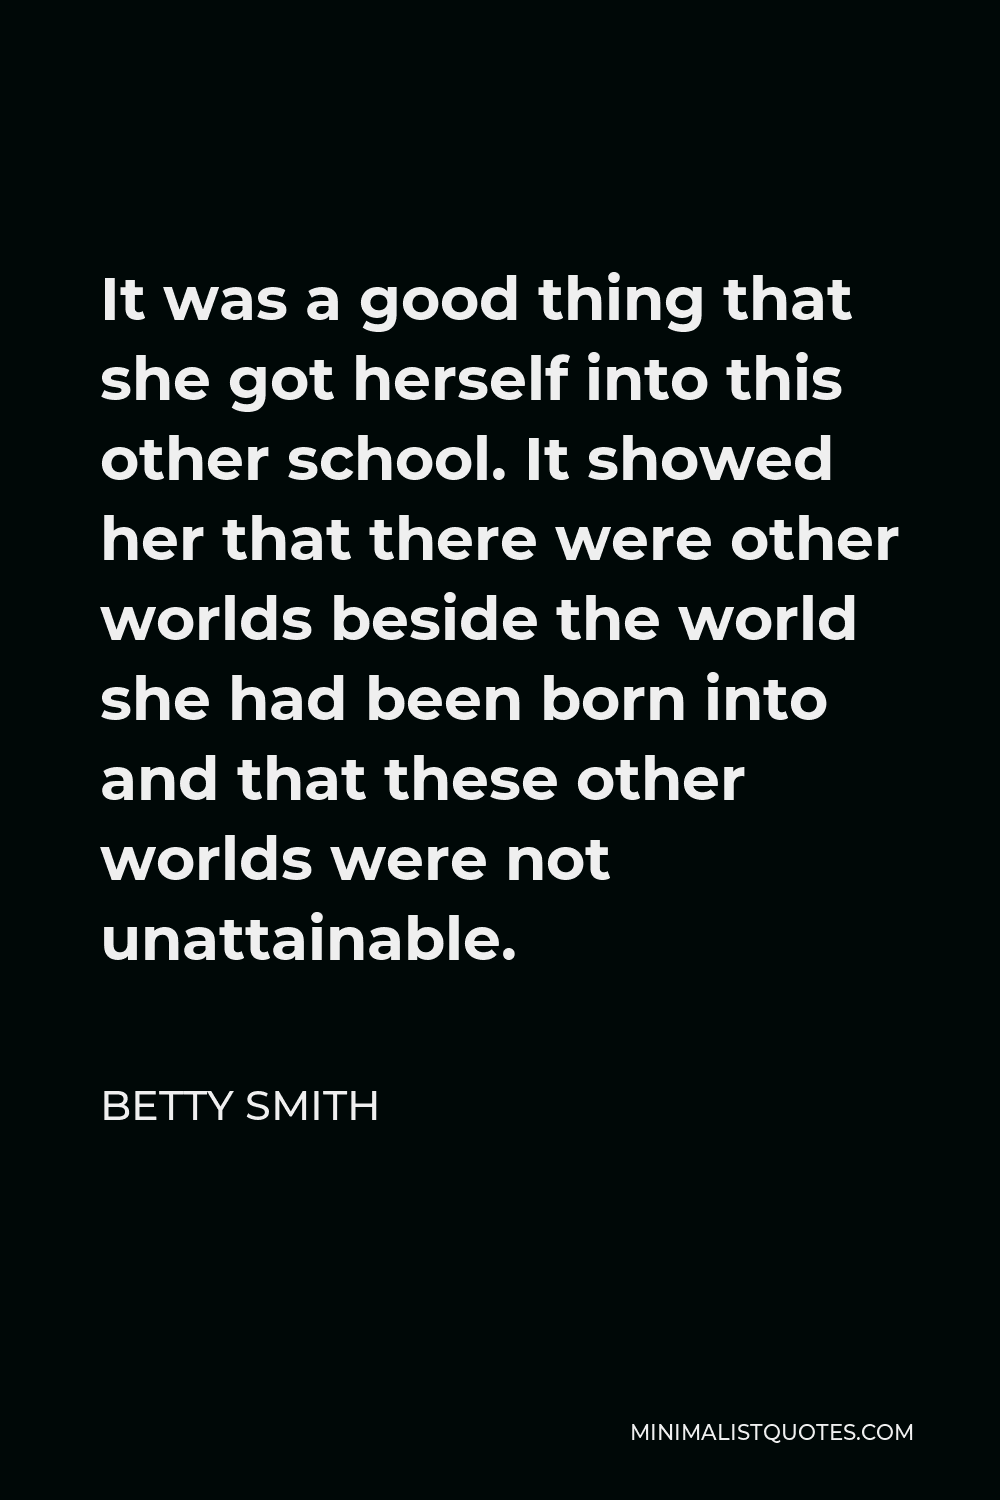 Betty Smith Quote - It was a good thing that she got herself into this other school. It showed her that there were other worlds beside the world she had been born into and that these other worlds were not unattainable.